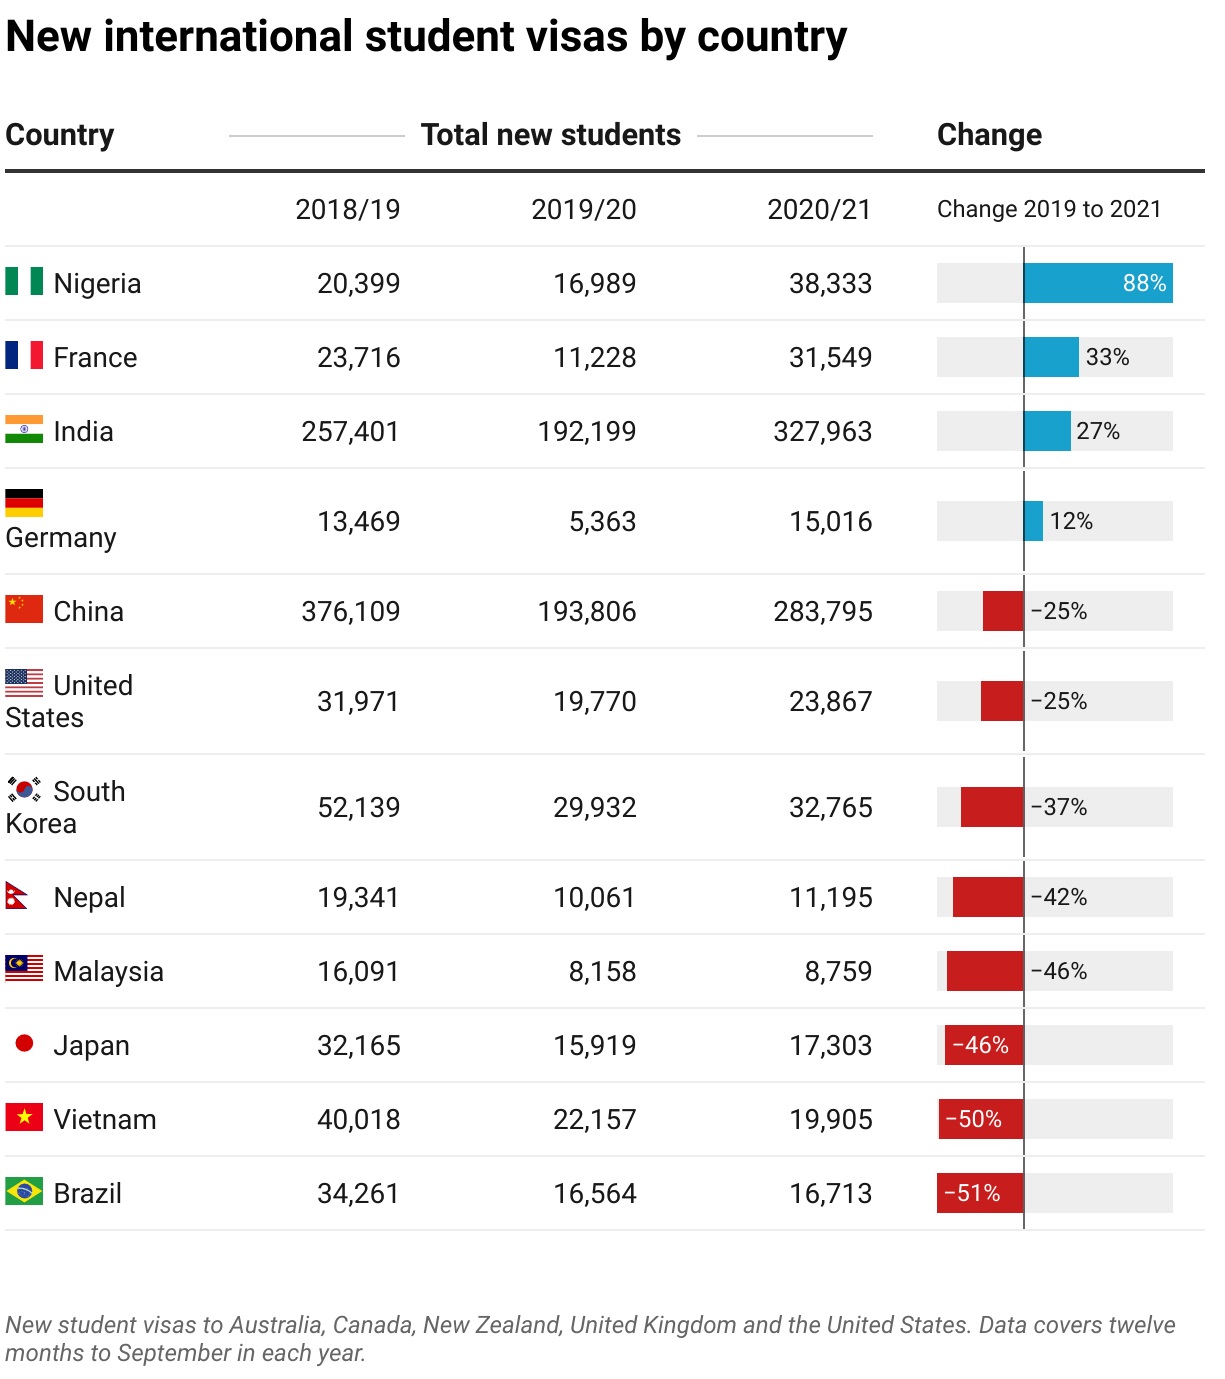  Table of new International Student Visas by country 